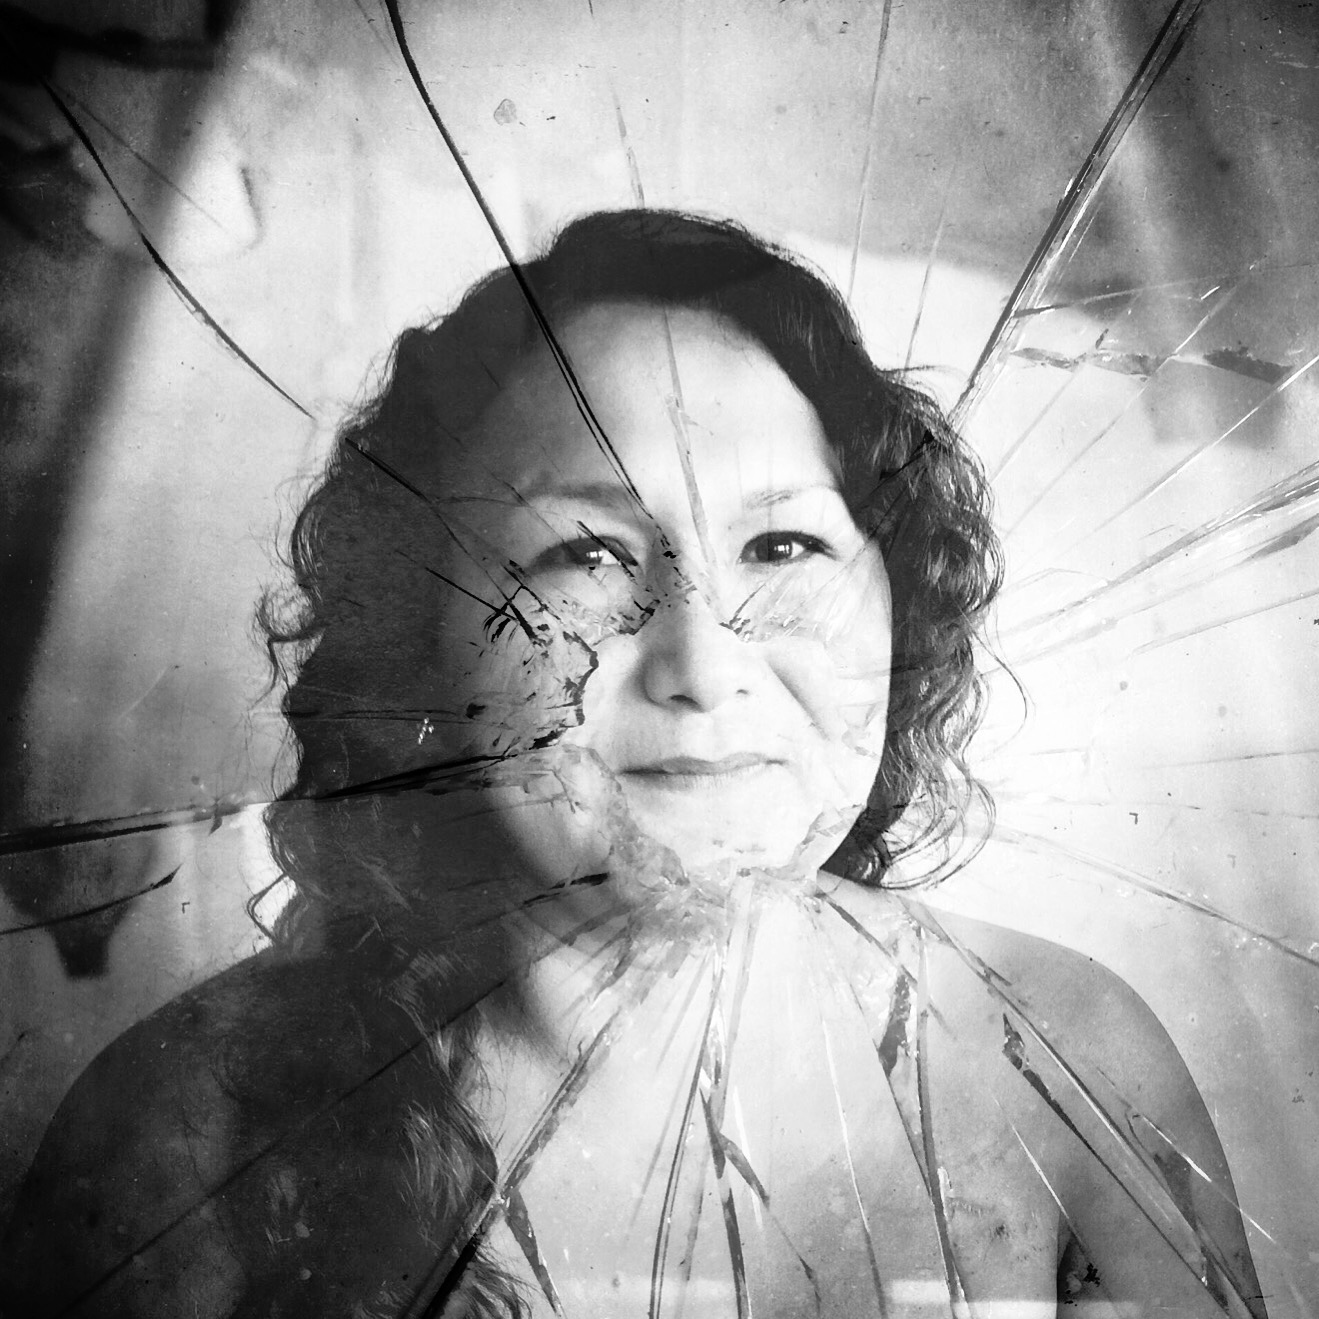 This is Jaime Rockthunder, who went to the Qu'Appelle Indian Residential School from 1990-1994. She was sexually assaulted during her time there, and her younger brother was raped by a classmate. Jaime said, "He finally told me about it, almost 20 years later, and he blamed me. All he could say is, 'Why didn't you protect me?'" One of the most haunting legacies of the residential school system is how much of the trauma transitioned into lateral violence — entire generations of indigenous children grew up without their families and frequently were subjected to unspeakable physical and sexual violence. That anger and hurt was often channeled into lashing out at each other, and, when they eventually had children of their own, the next generation as well.